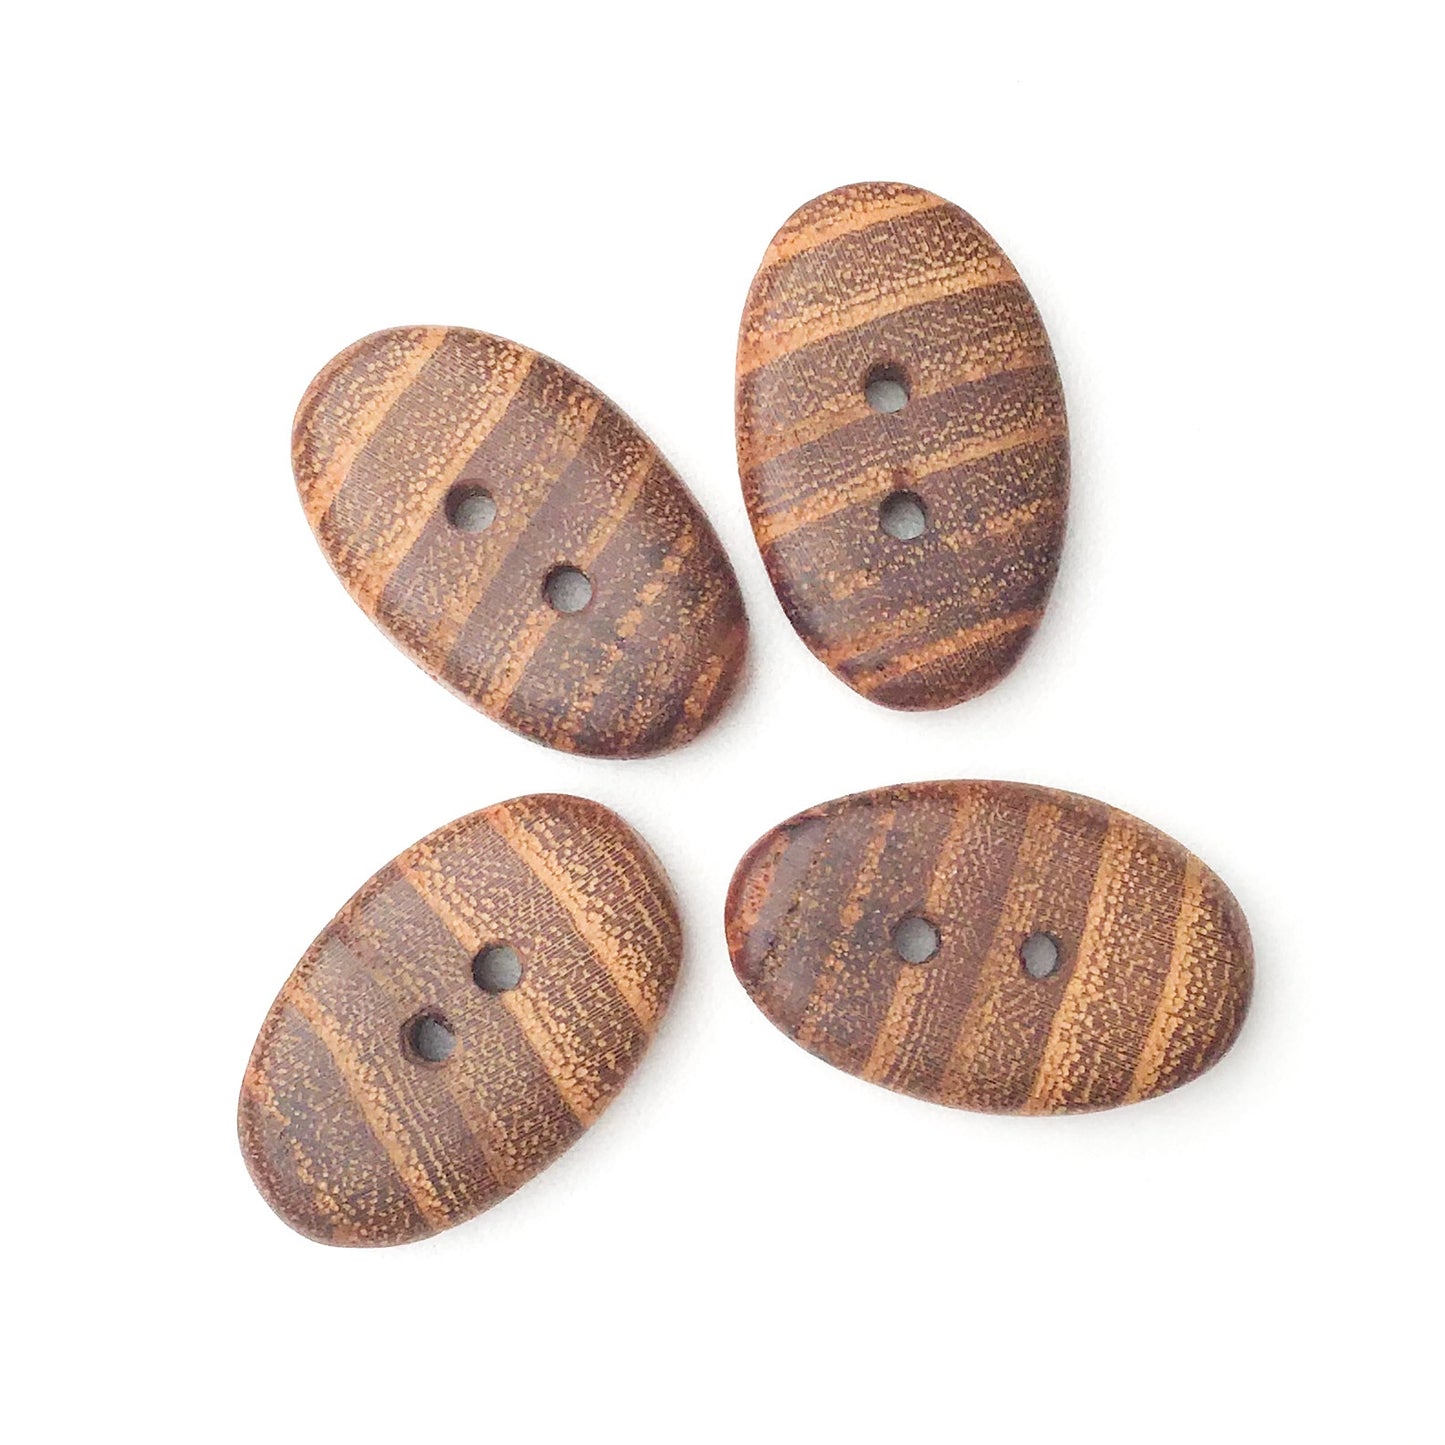 Black Locust Wood Buttons - Wooden Toggle Buttons - 3/4" X 1 3/16" - 4 Pack